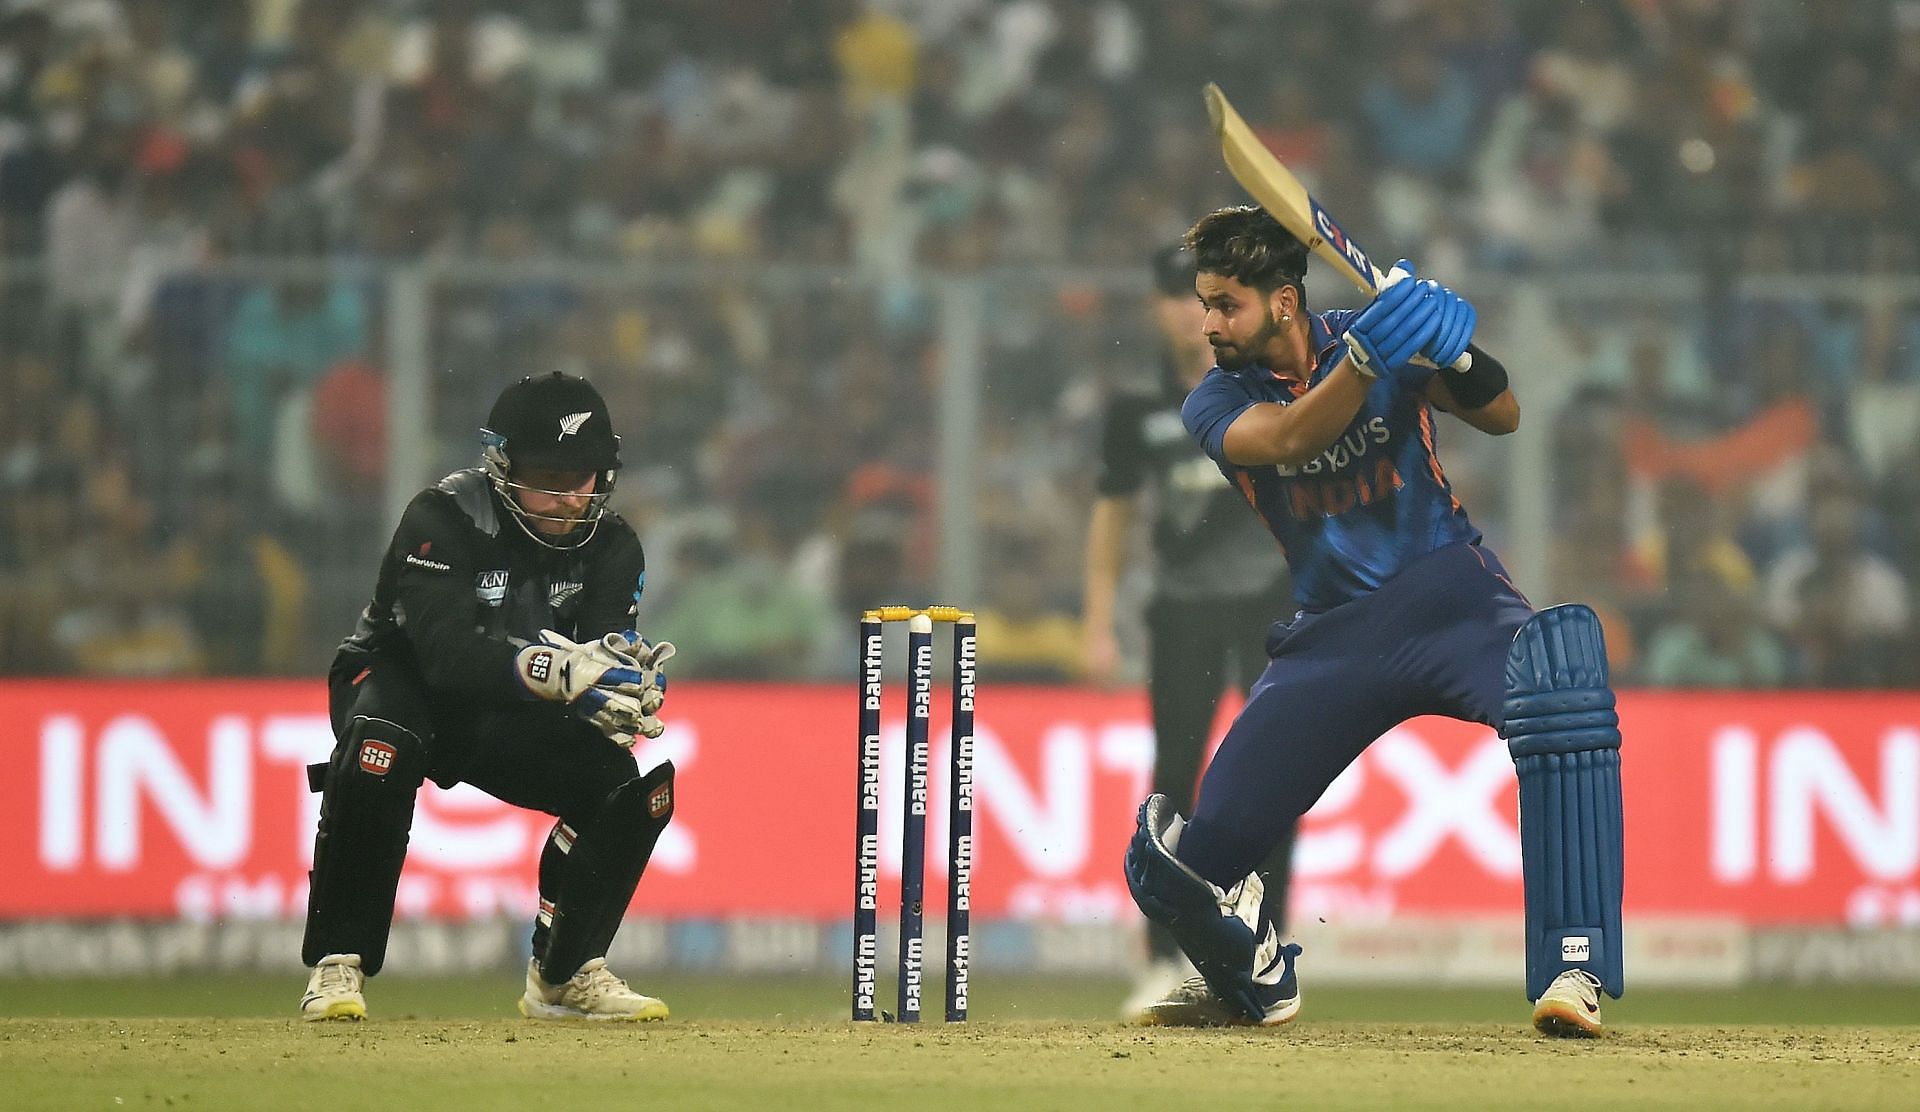 Aakash Chopra is not convinced with Shreyas Iyer as a finisher